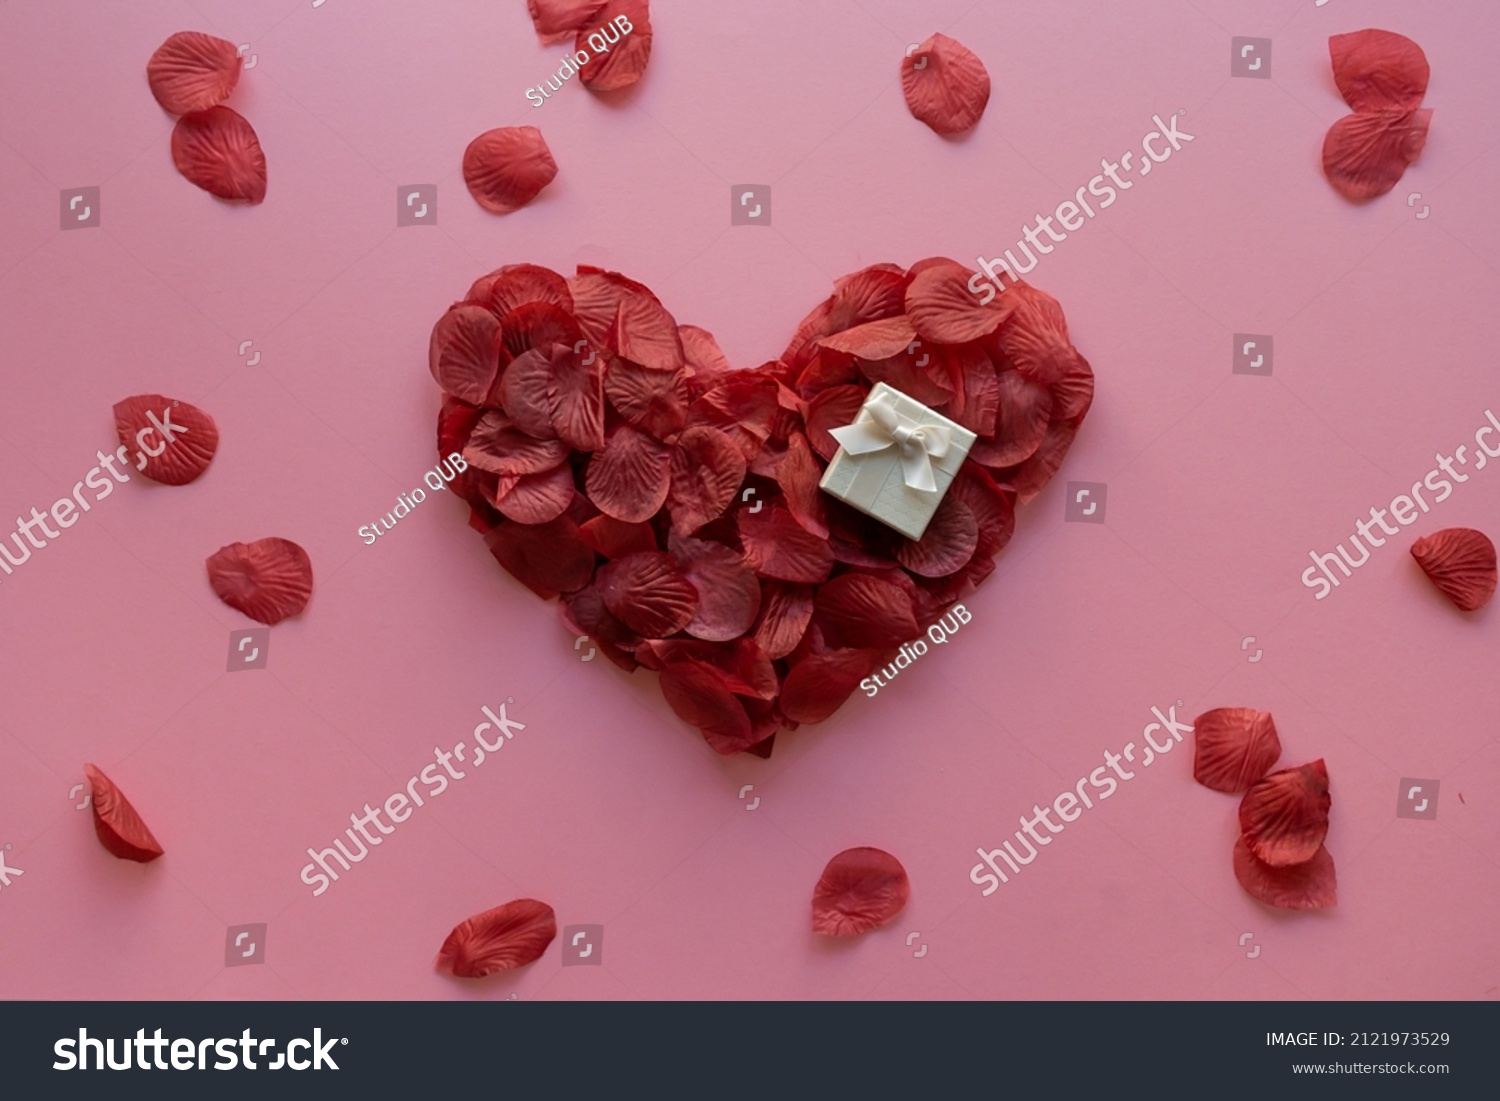 Valentine's day heart made with rose petals and gift box #2121973529